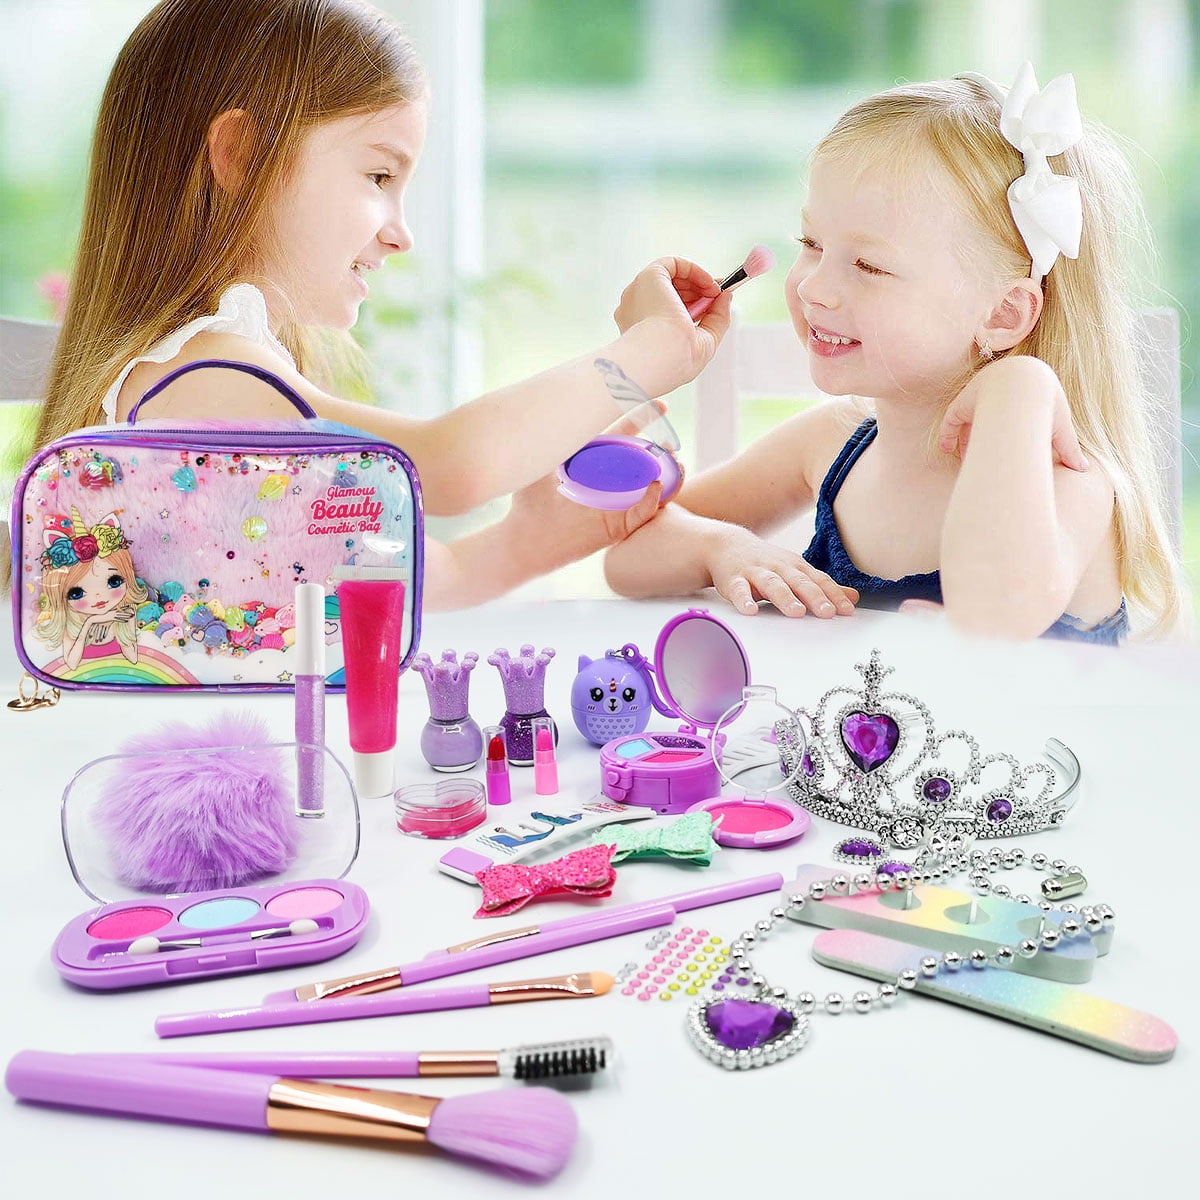 Kids Makeup Kit for Girls, Soft to skin, Easy to wash, 17 Pcs Princess Makeup  Set Toys for 3 4 5 6 7 8 9 10 11 12 & Up Year Old